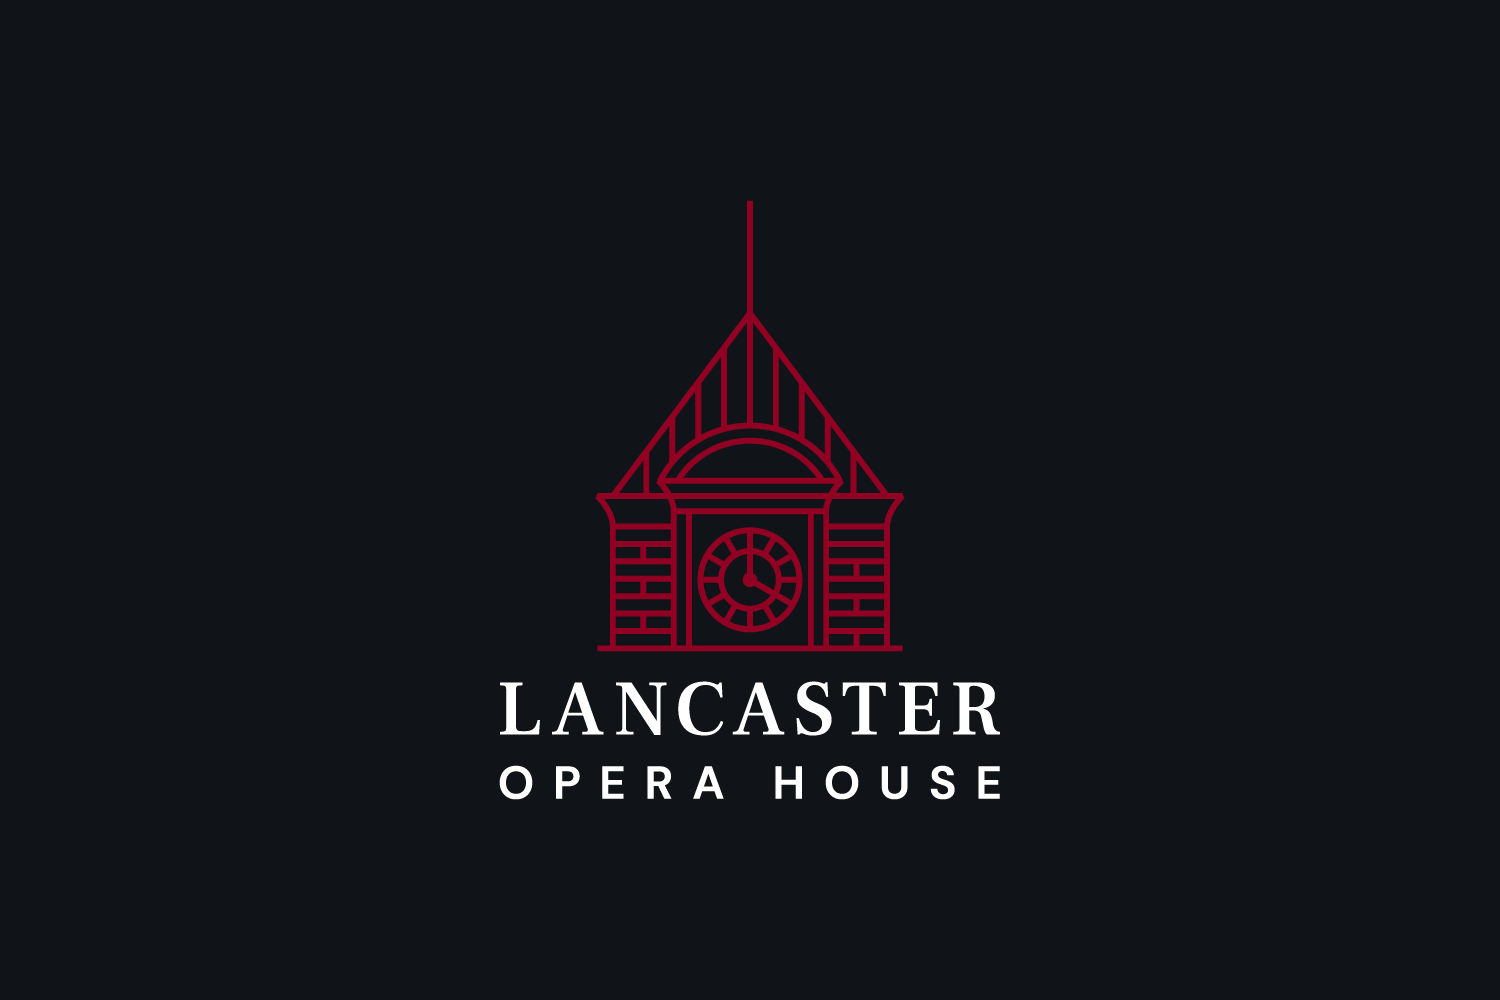 to our new website Lancaster Opera House